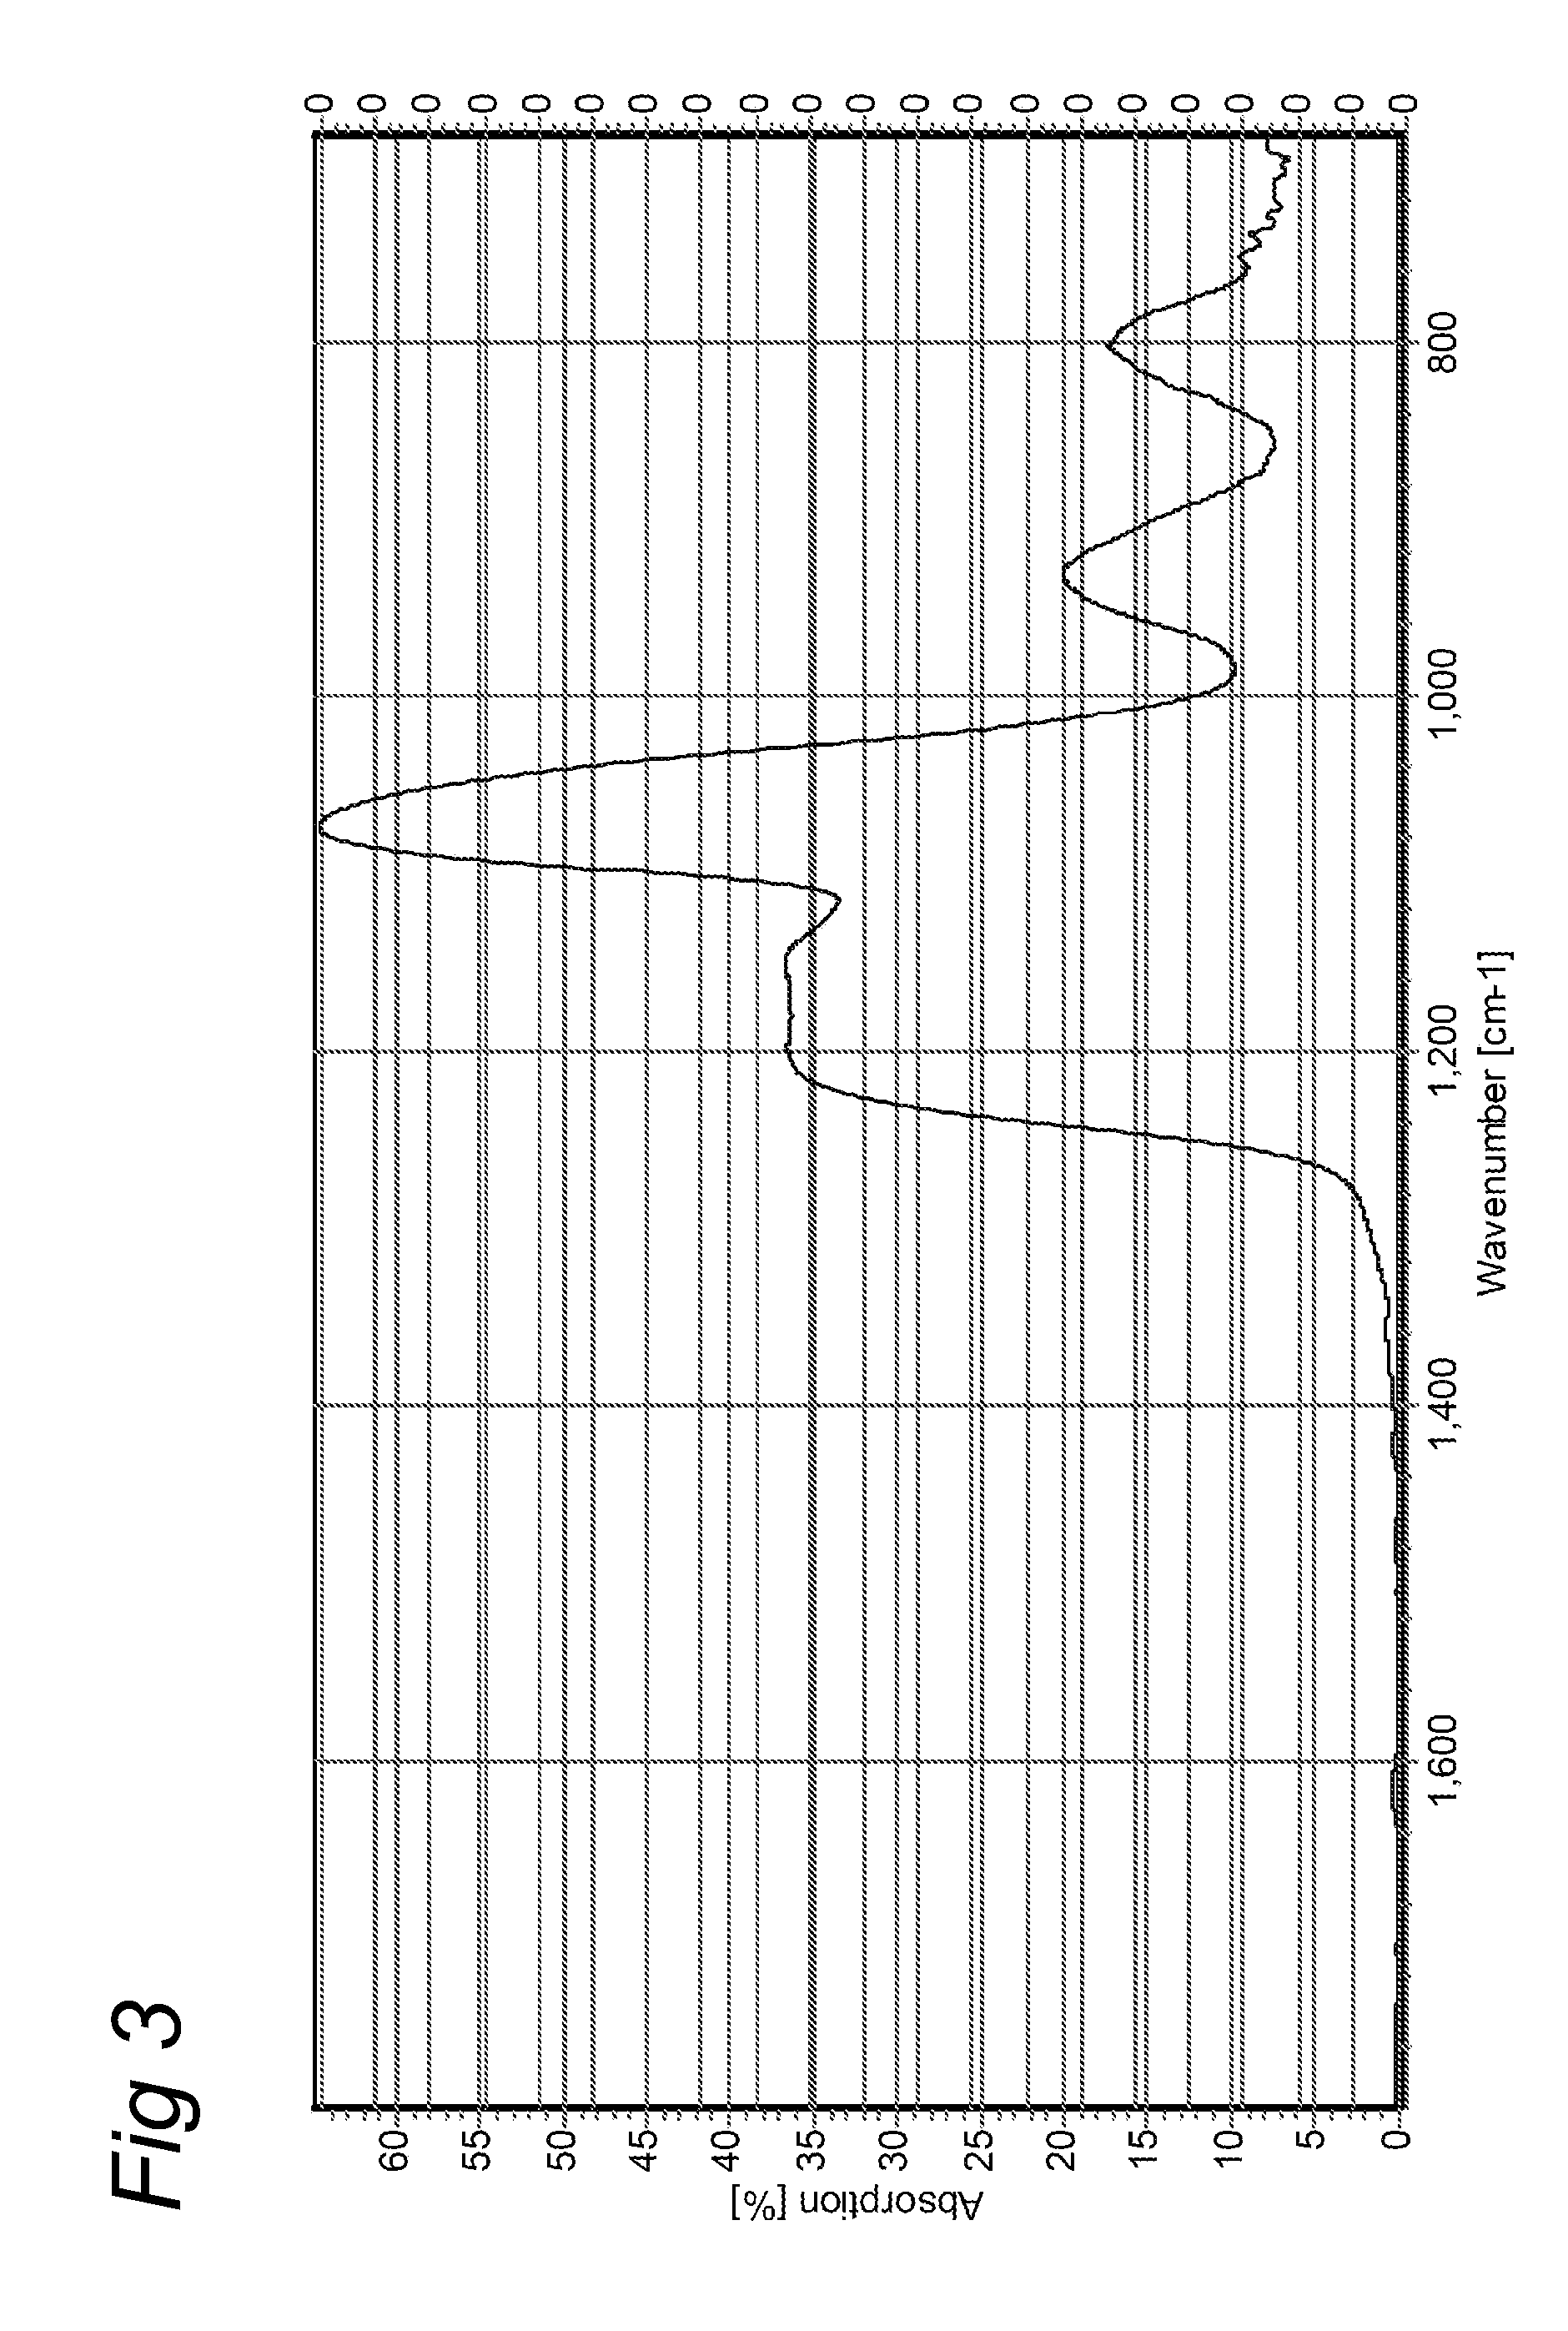 Method for deposition using pulsed atmospheric pressure glow discharge